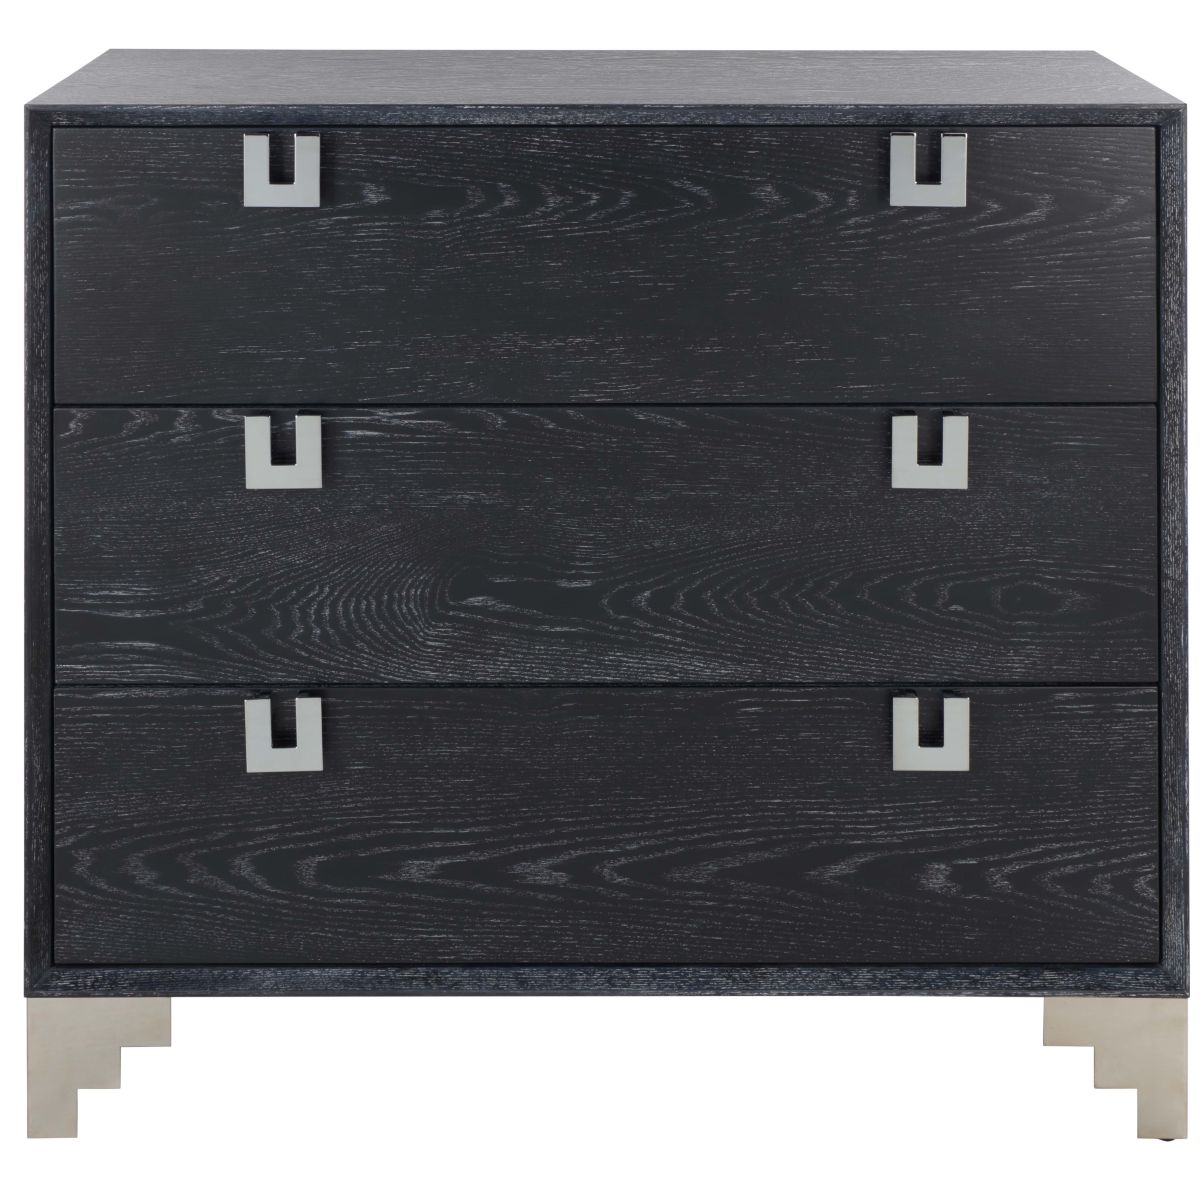 Safavieh Couture Odalis Lacquer Chest Of Drawers - Black Cerused Oak